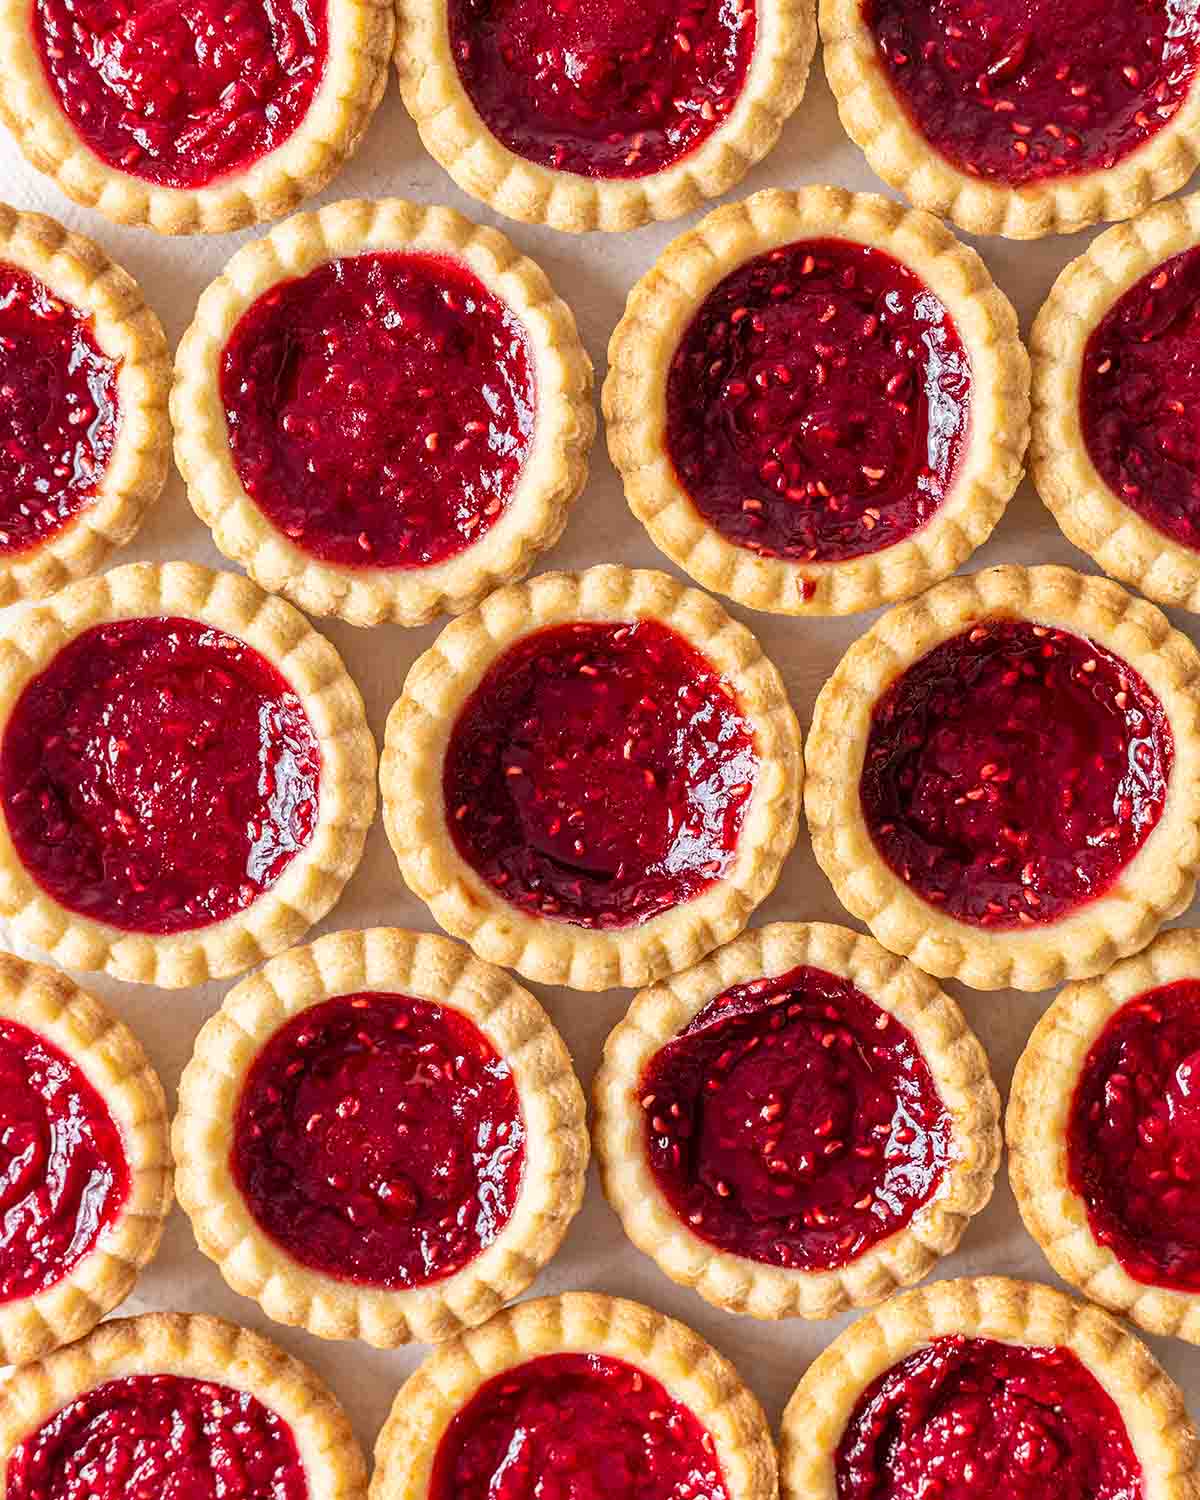 Overhead image of repeated jam tarts emphasising fluted egdes and bright red jam filling.